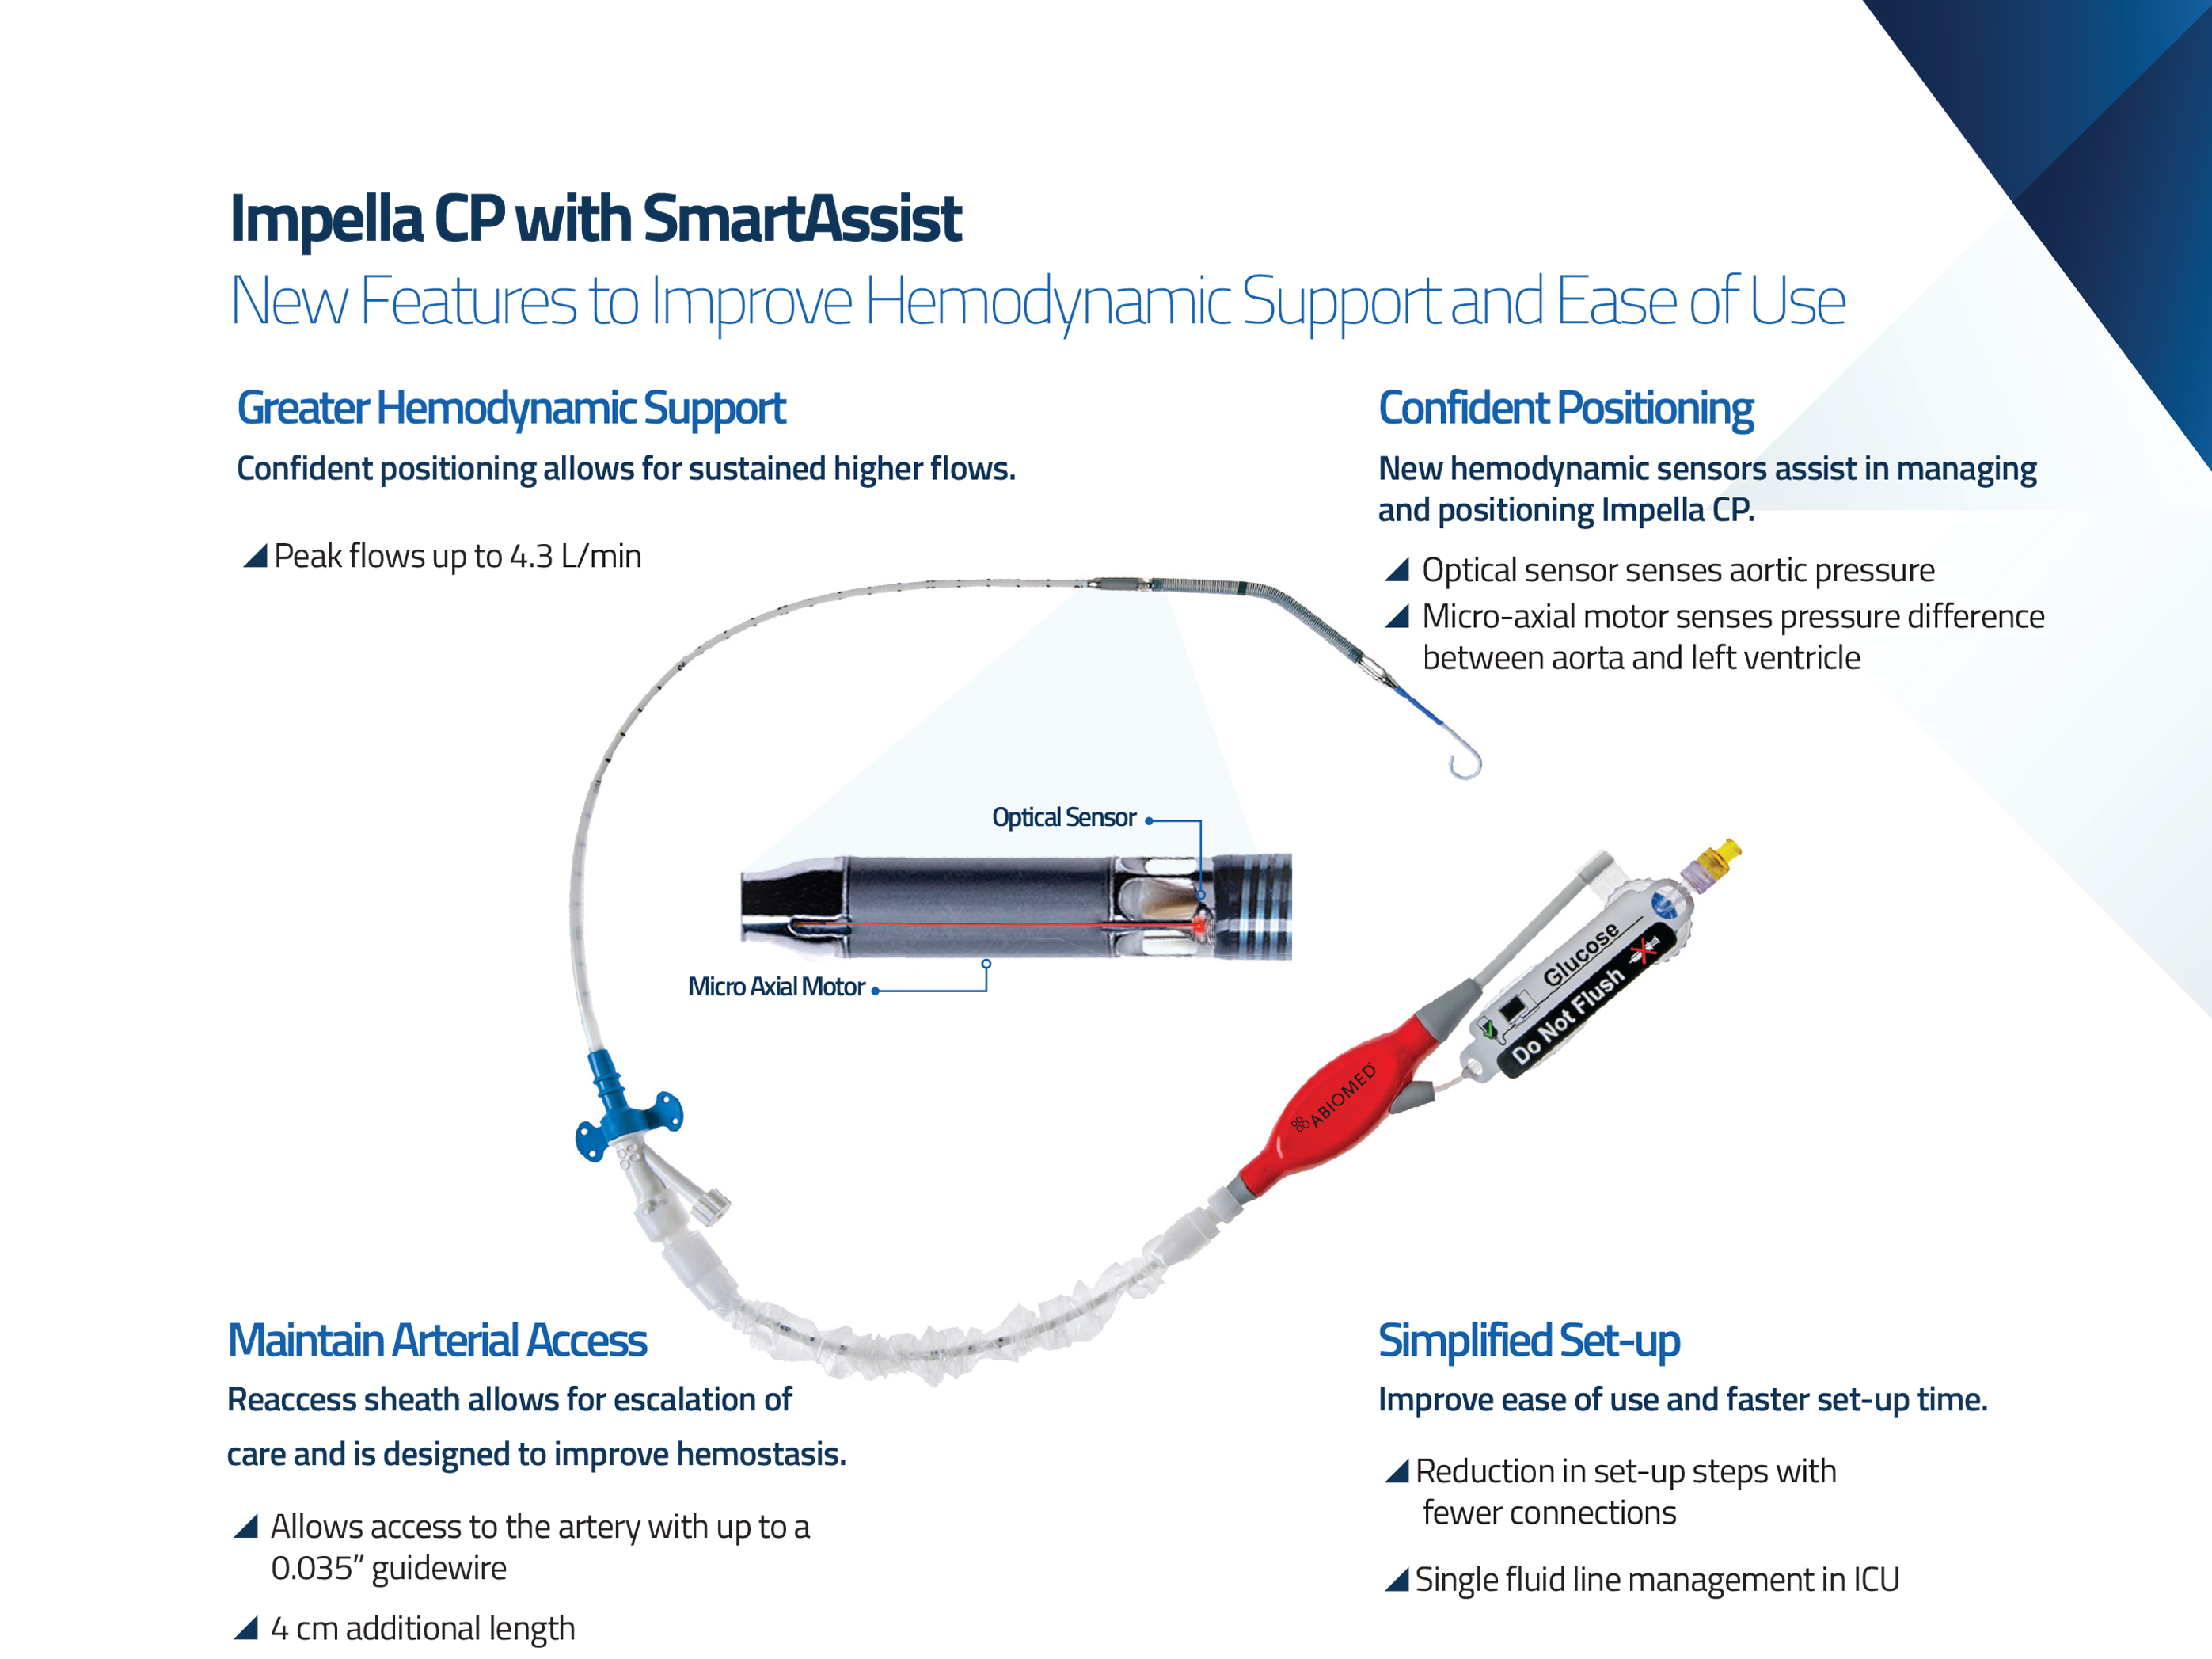 image showing the new features of Impella CP with SmartAssist